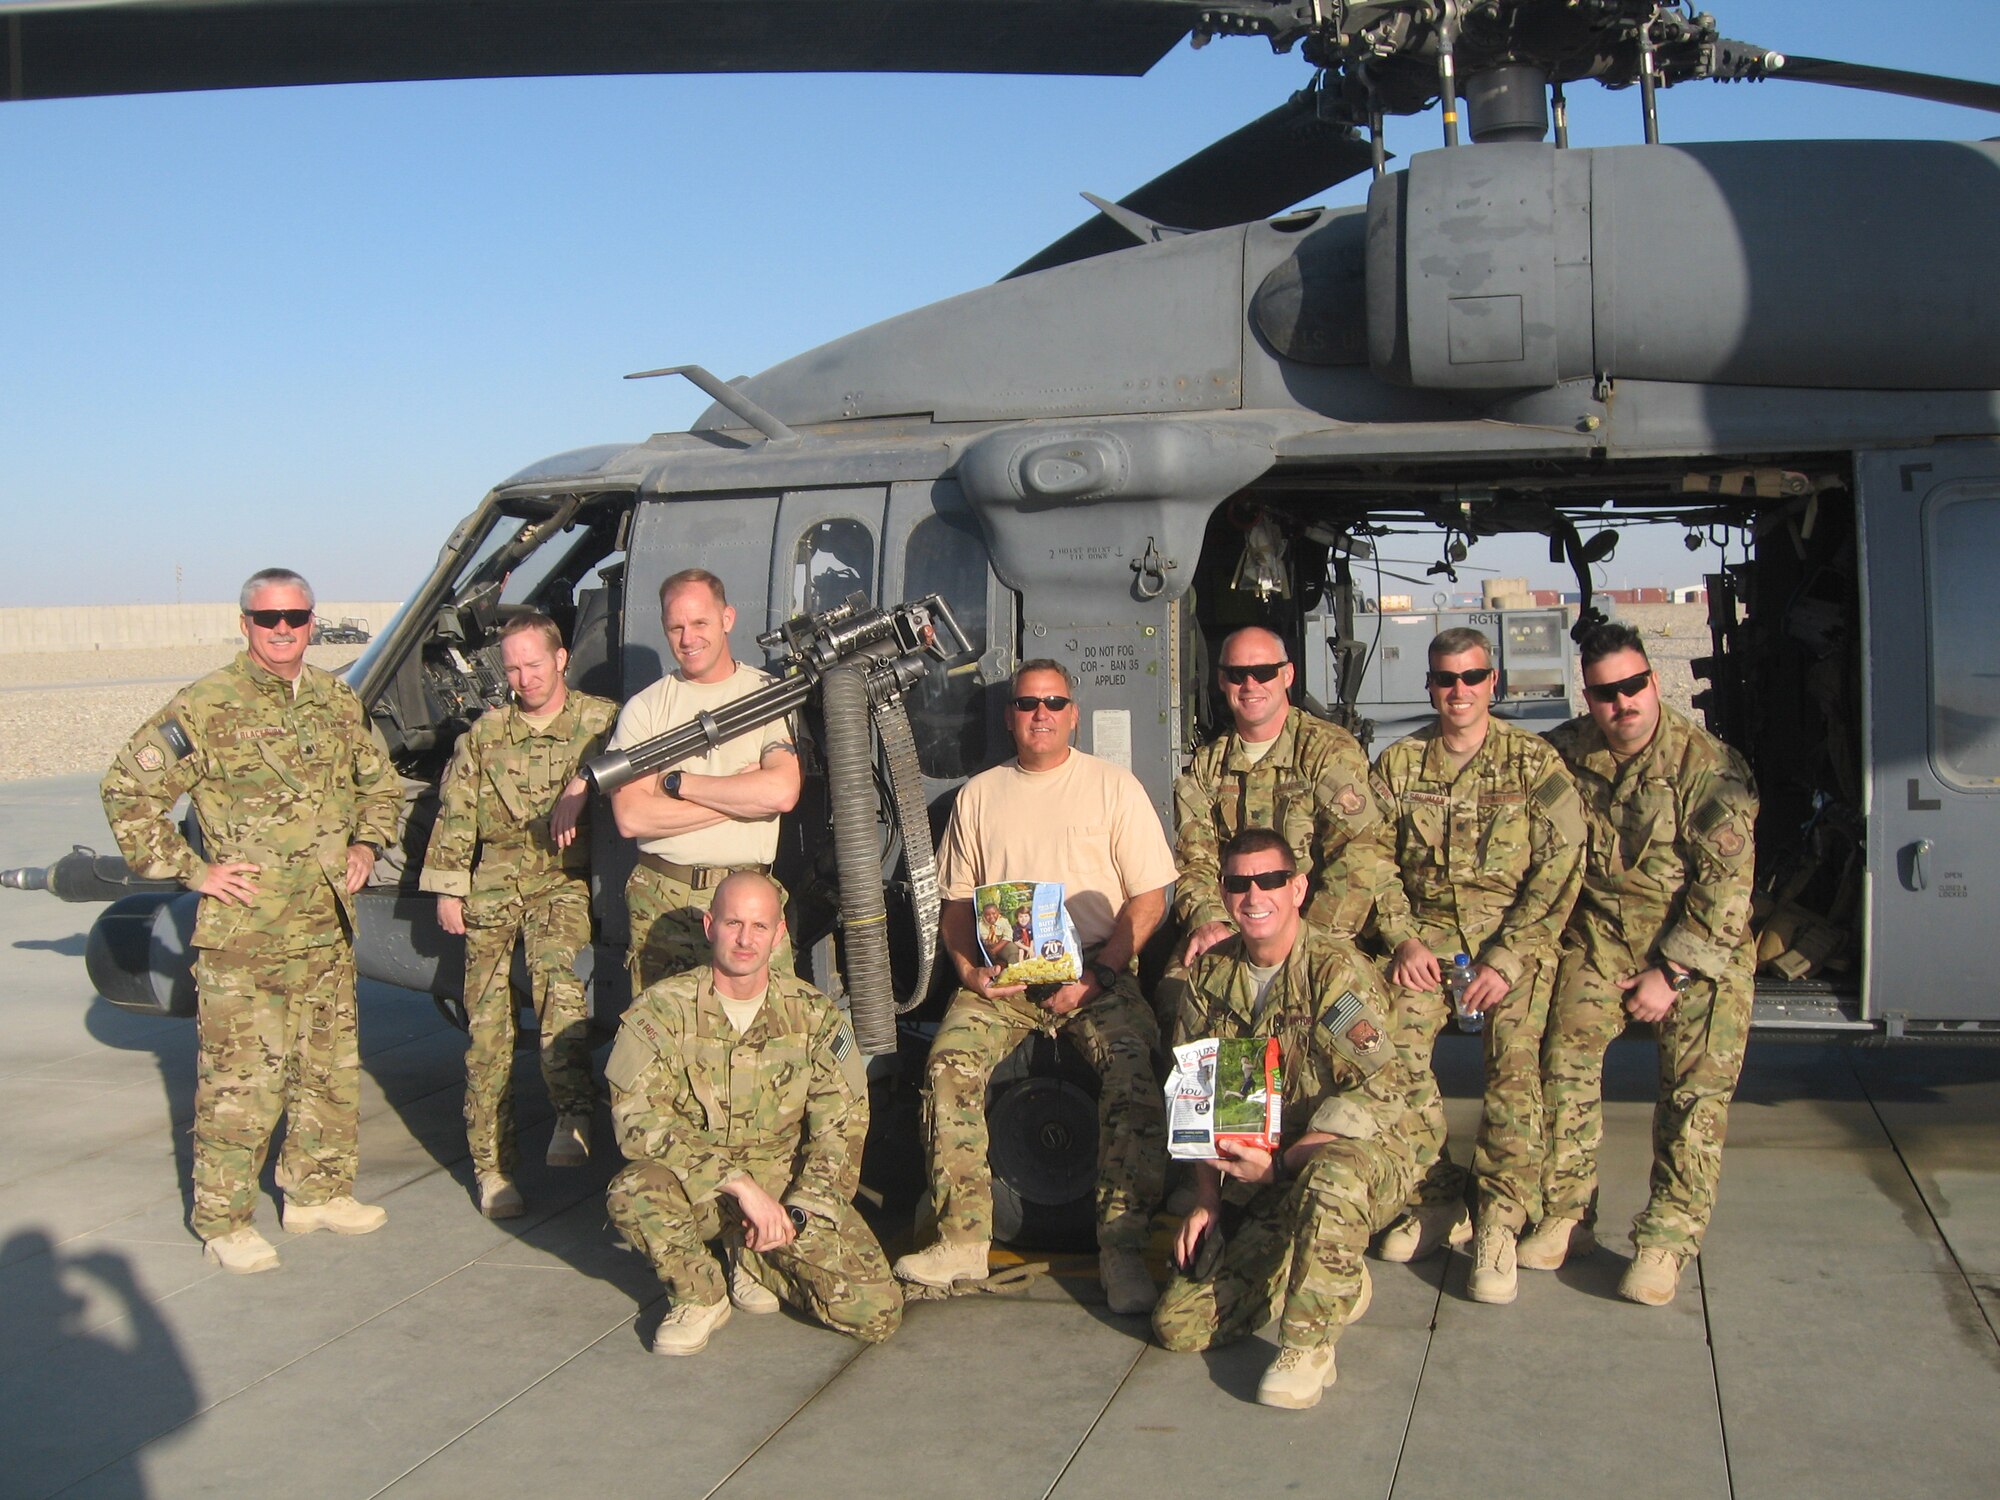 Reserve Rescue Airmen from the 920th Rescue Wing, Patrick Air Force Base, Fla., pose next to their HH-60G Pave Hawk helicopter in Afghanistan with bags of popcorn they received from local Space Coast boy scouts. Boy scouts from Troop 300 in Melbourne, Fla. presented 10 cases of assorted popcorn, from caramel to microwave kettle corn, to Lt. Col. Tony Cunha, 920th RQW Operations Support Squadron Commander and the troop's assistant troop master, on behalf of the 920th RQW Commander, Col. Jeffrey Commander, at one of their weekly meetings last fall. (Courtesy photo)